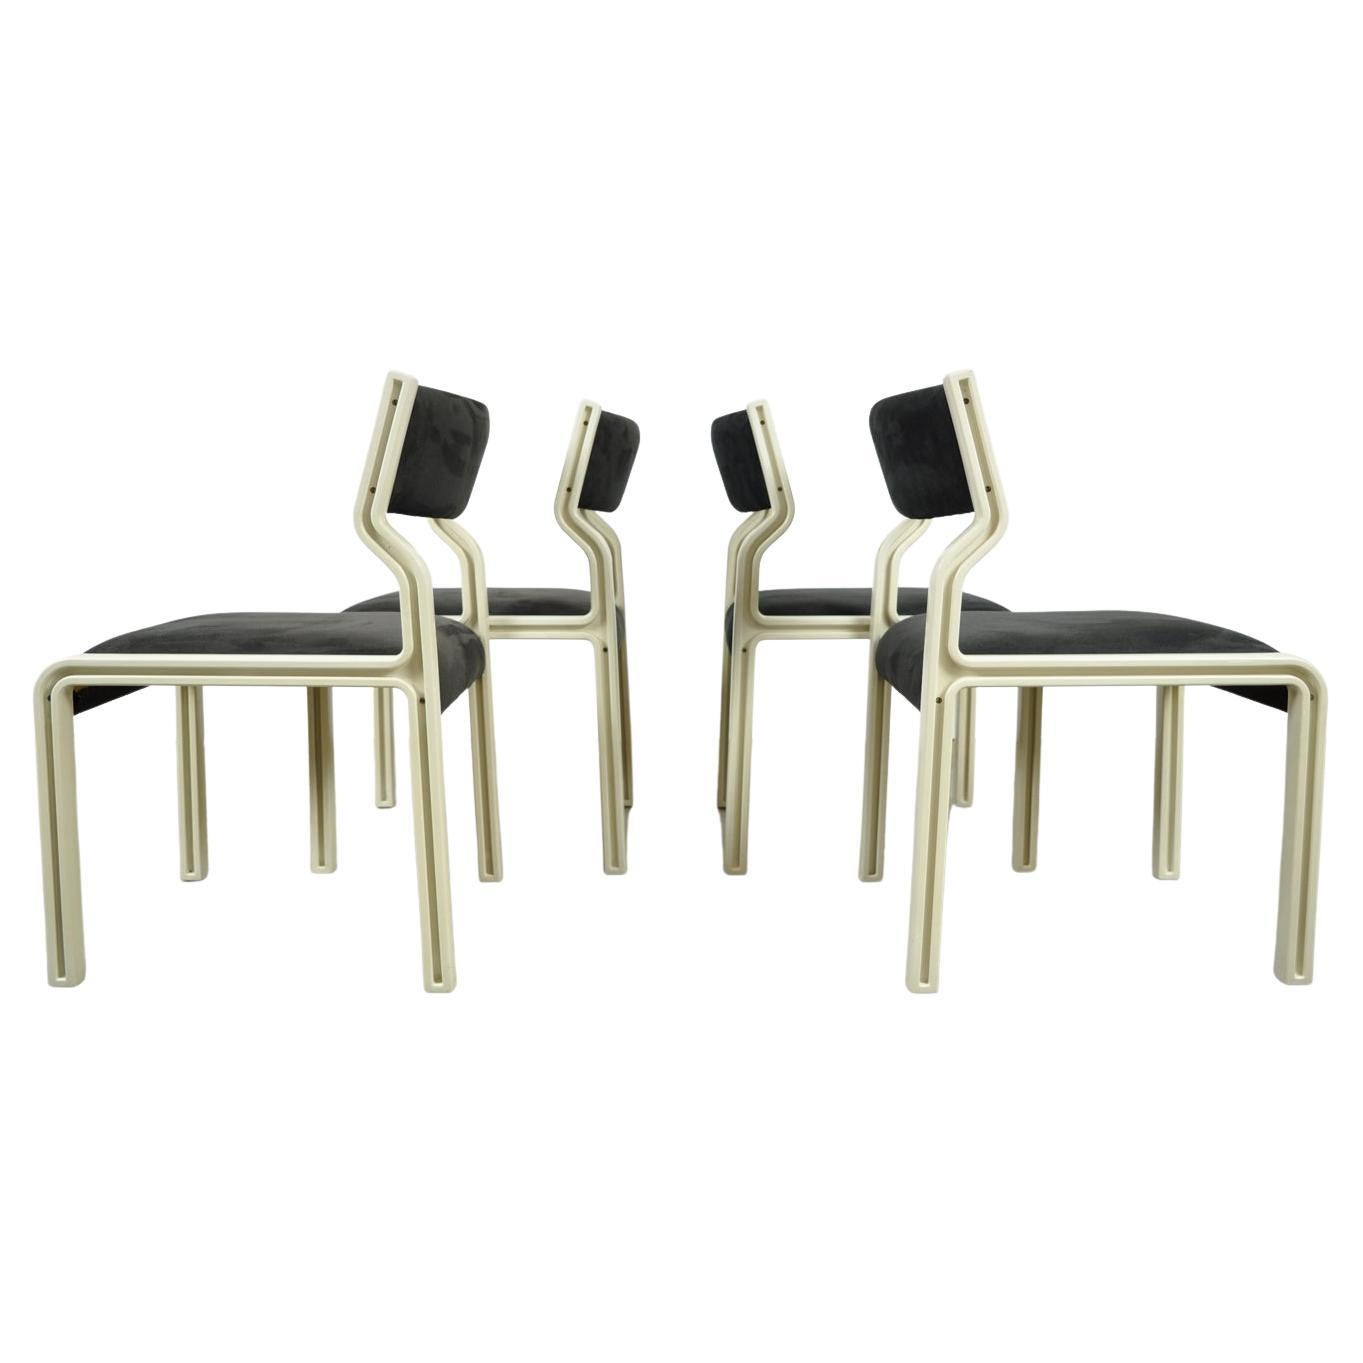 Set of 4 experimental dining chairs by Pierre Mennen for Pastoe, 1972 Netherland